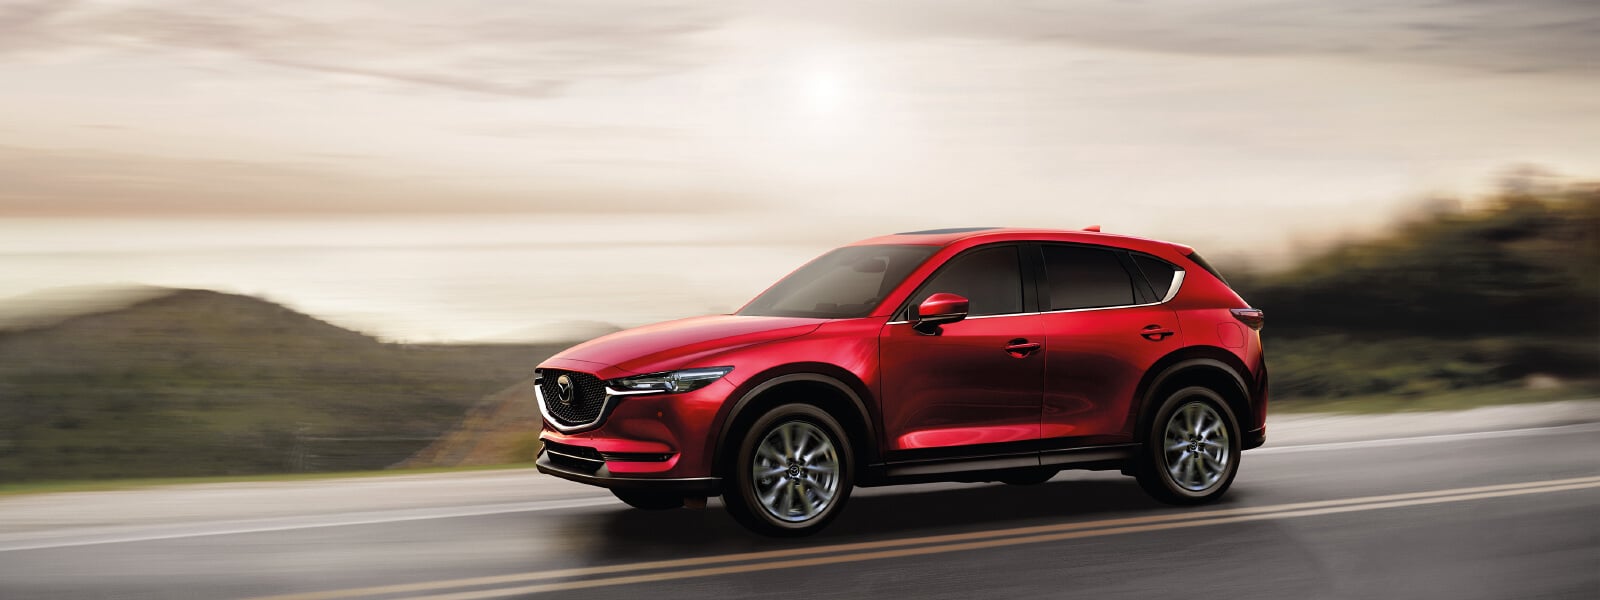 Highway driving with its high speeds, transport trucks and hazardous lane changes requires extra caution, and helpful technologies from Mazda.